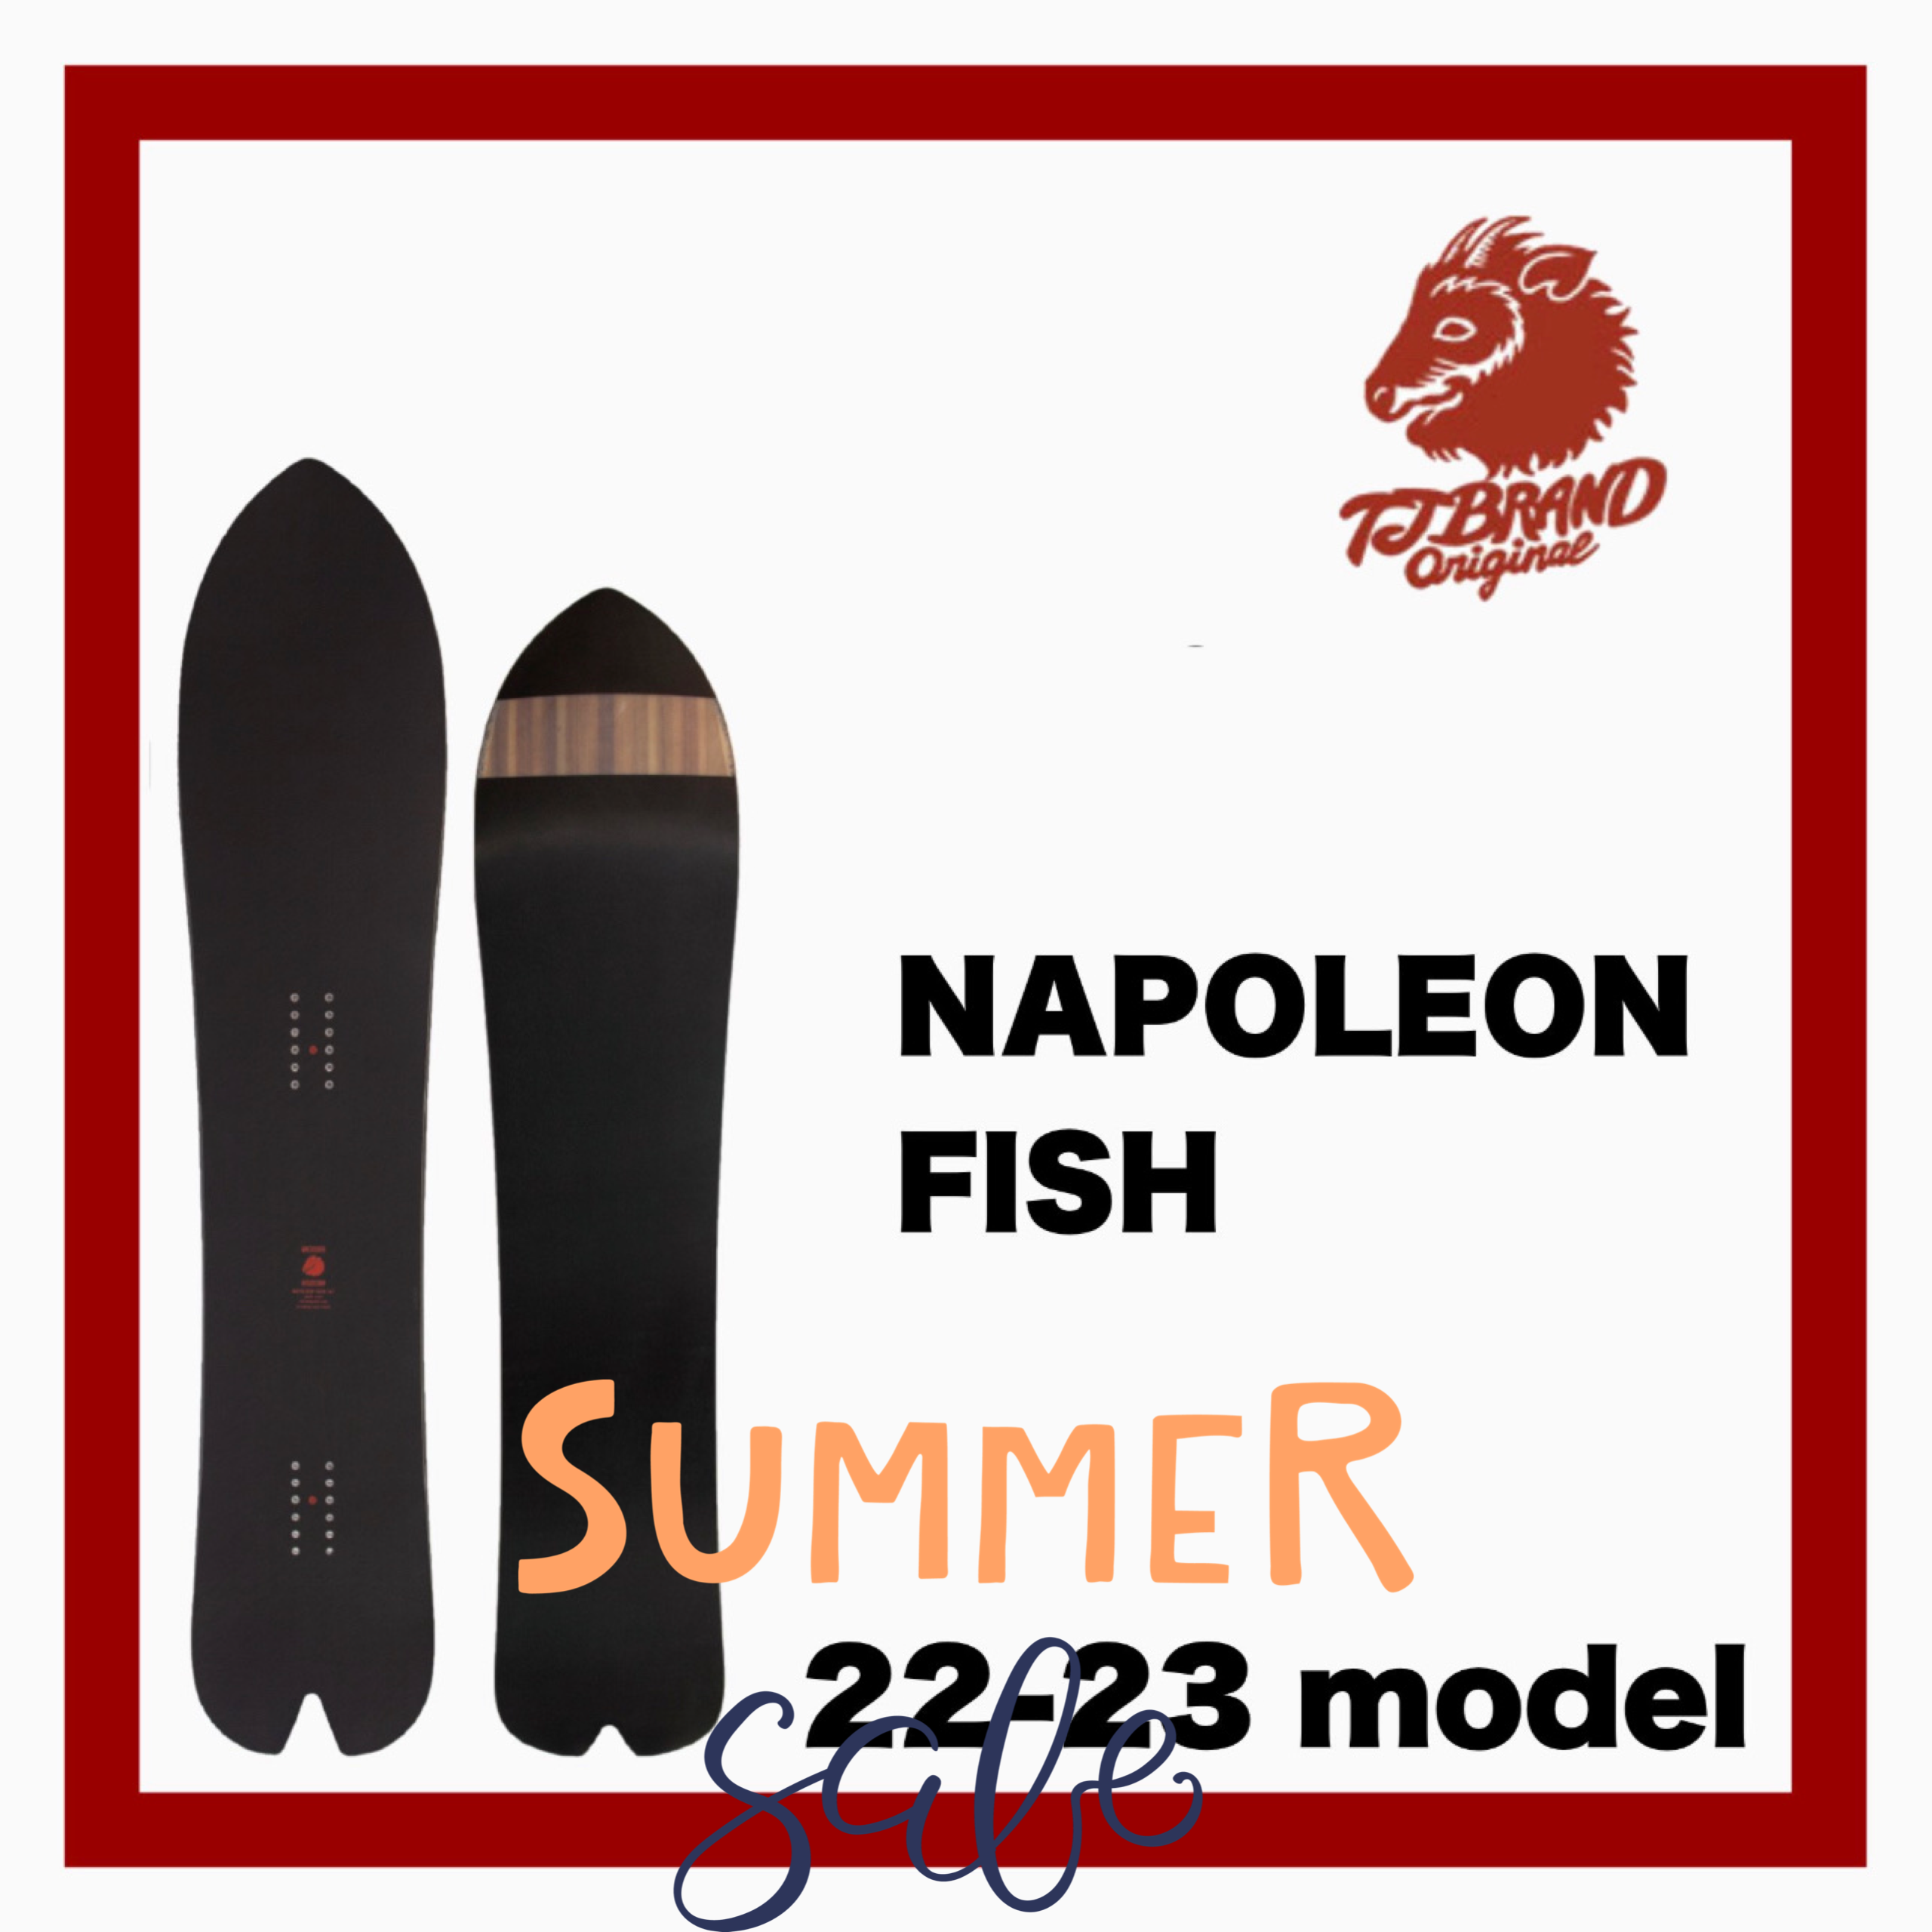 T.J BRAND 【NAPOLEON FISH】10%off - JOINT HOUSE